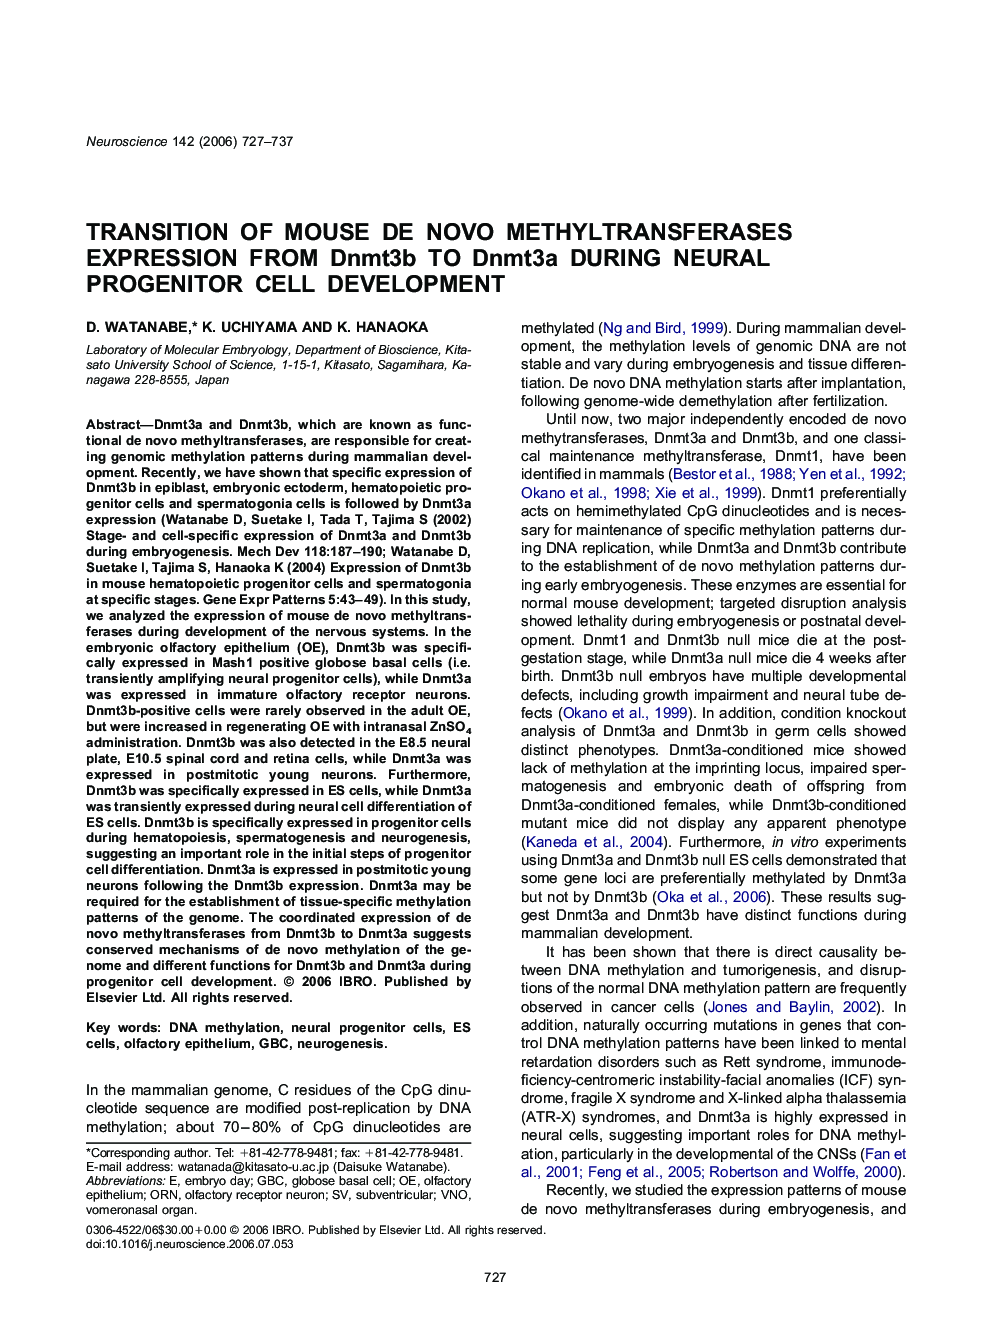 Transition of mouse de novo methyltransferases expression from Dnmt3b to Dnmt3a during neural progenitor cell development